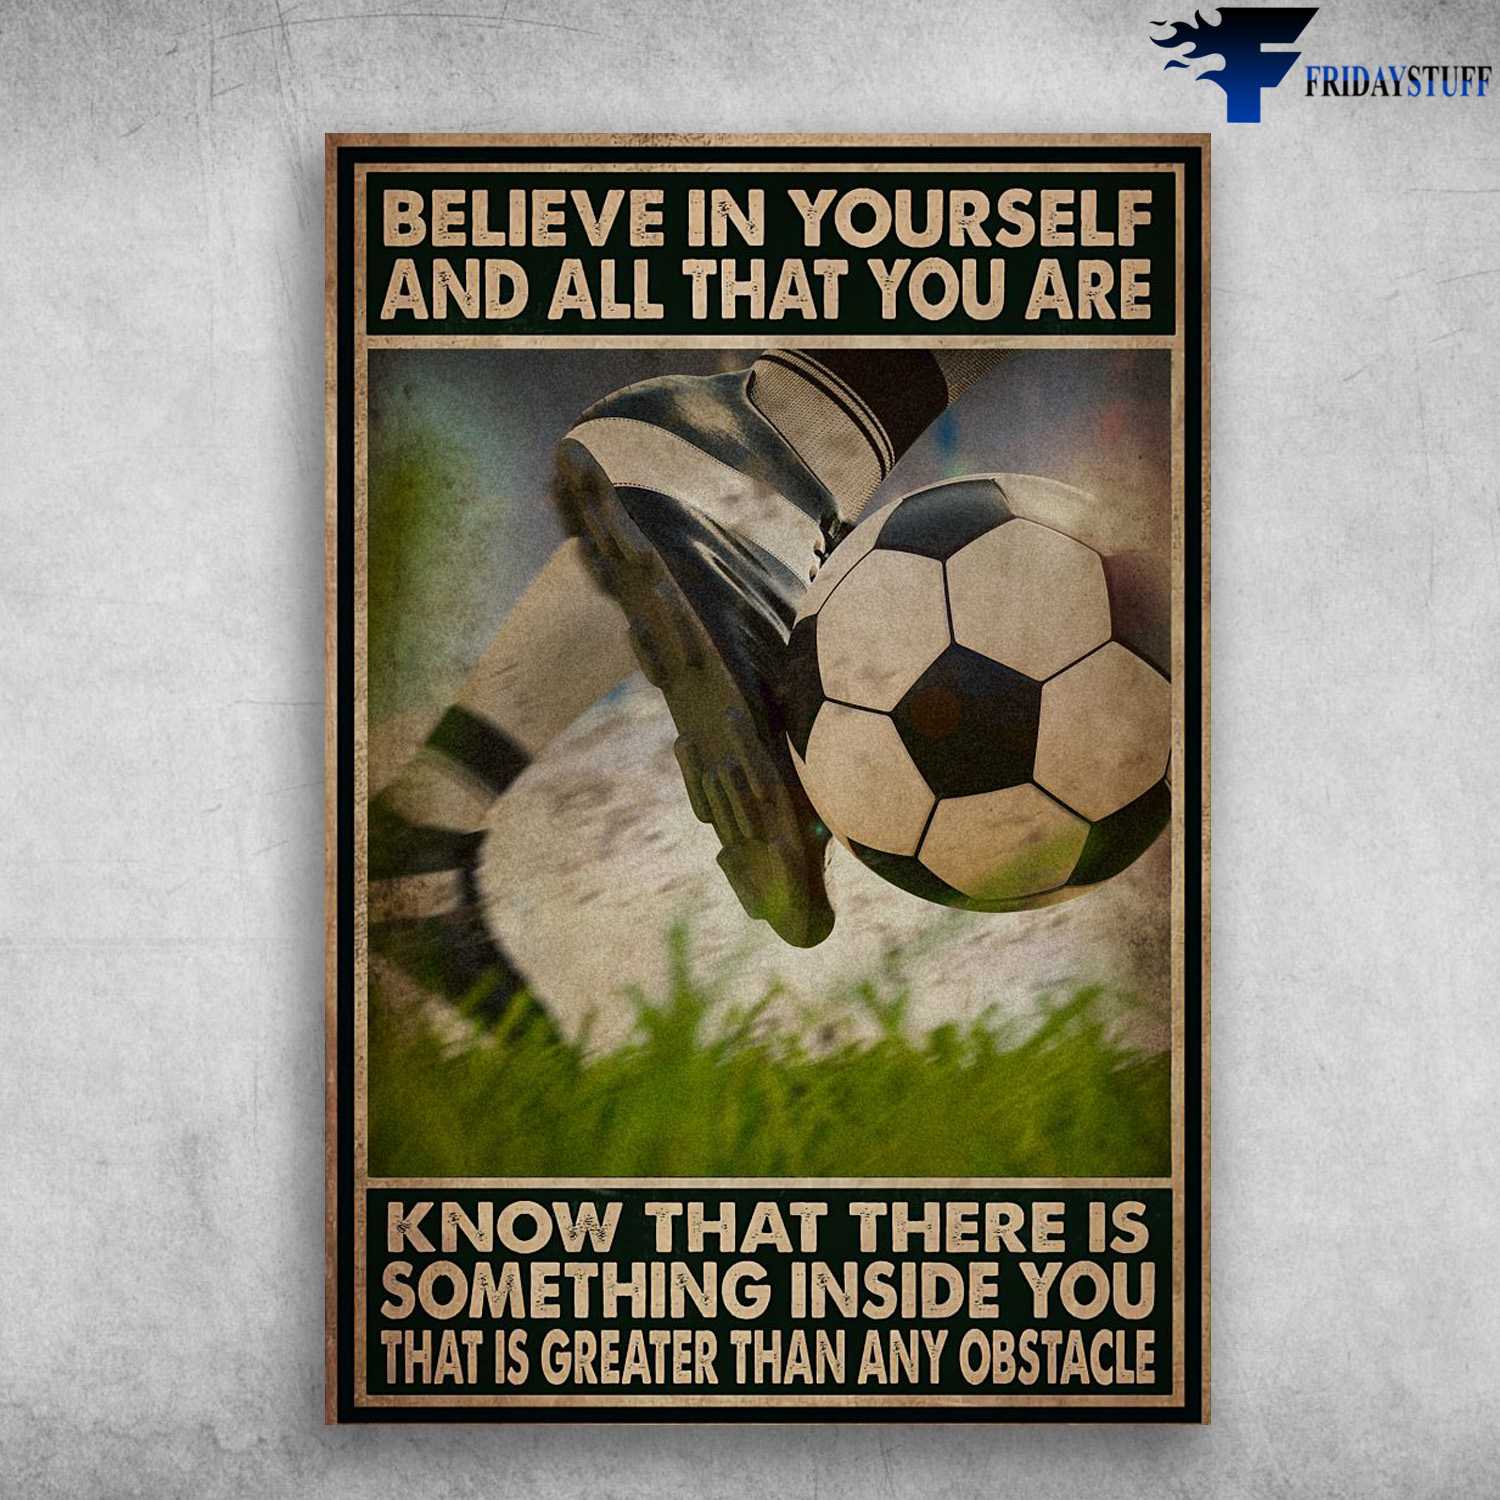 Soccer Liver, Soccer Poster, Believe In Yourself, And All That You Are, Know That There Is Something Inside You, That Is Greater Than Any Obstacle